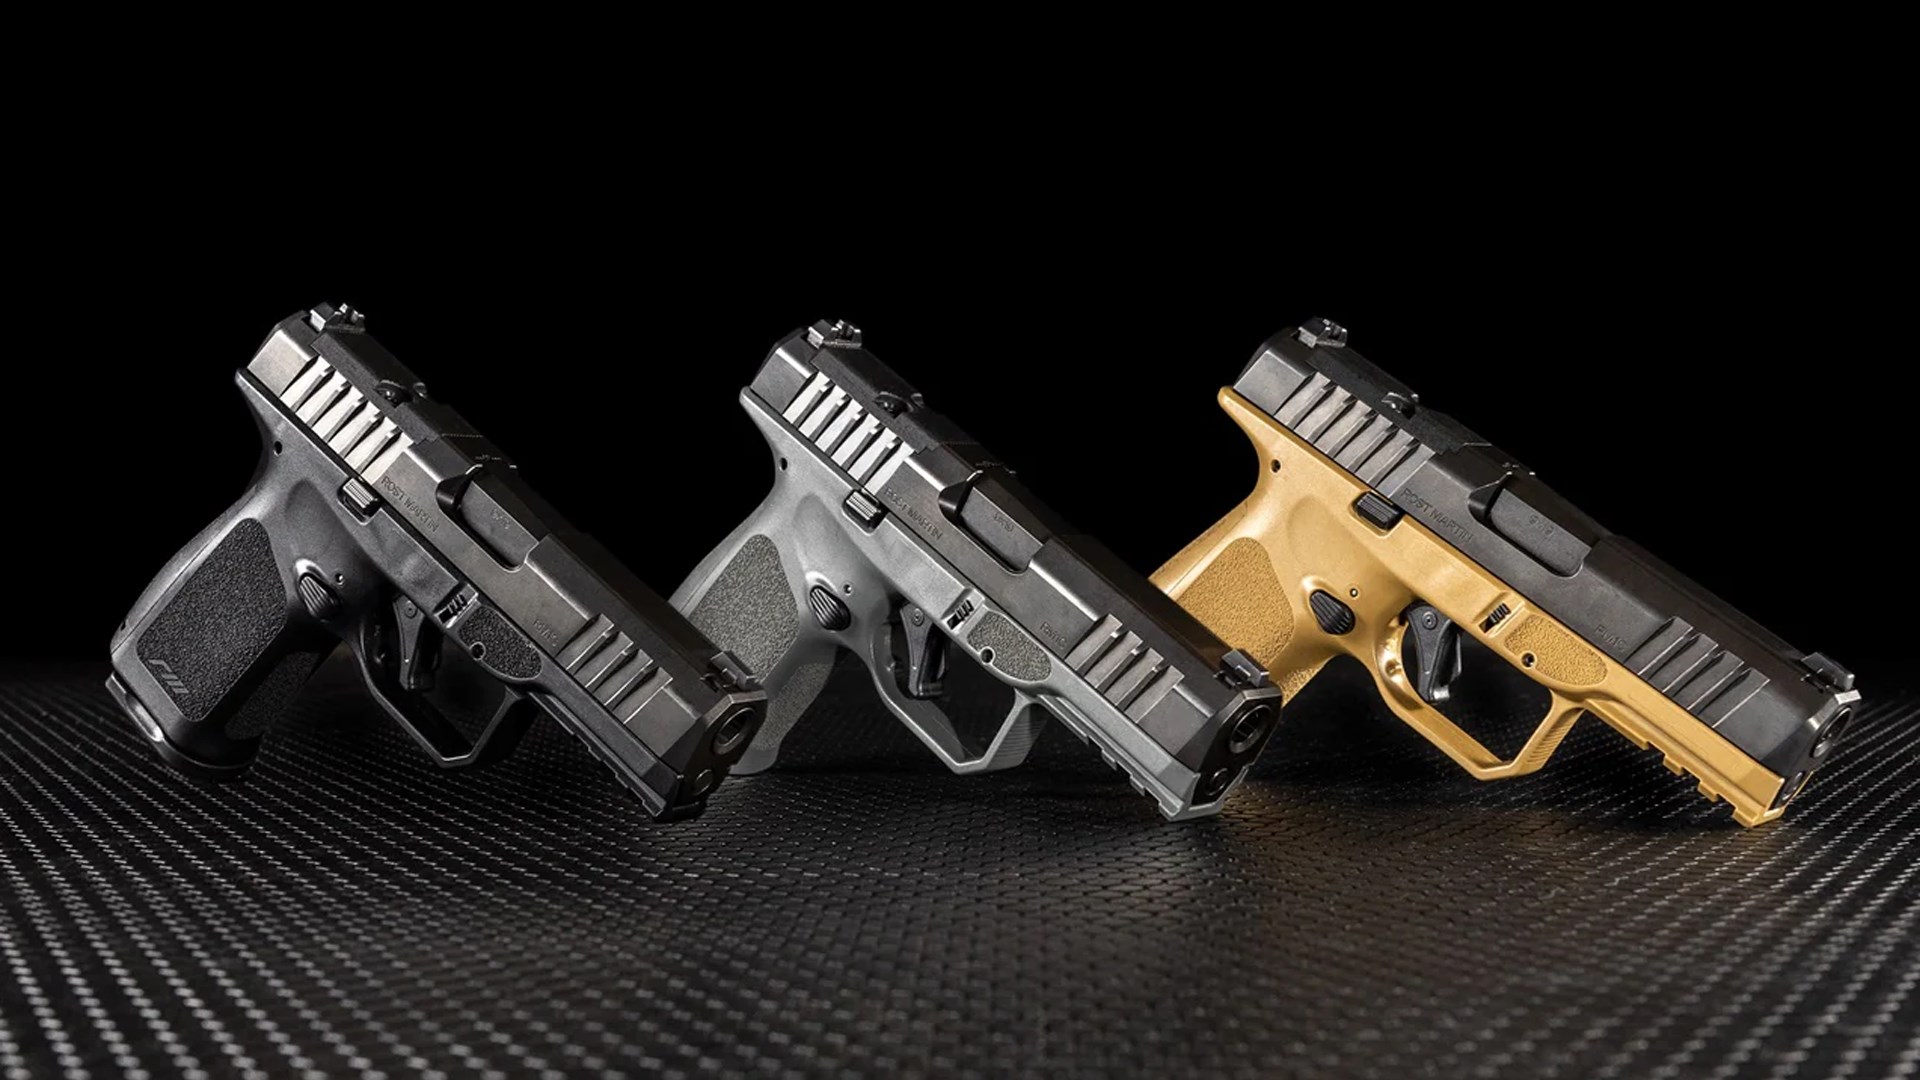 Three Rost Martin RM1C pistols shown with different frame colors.